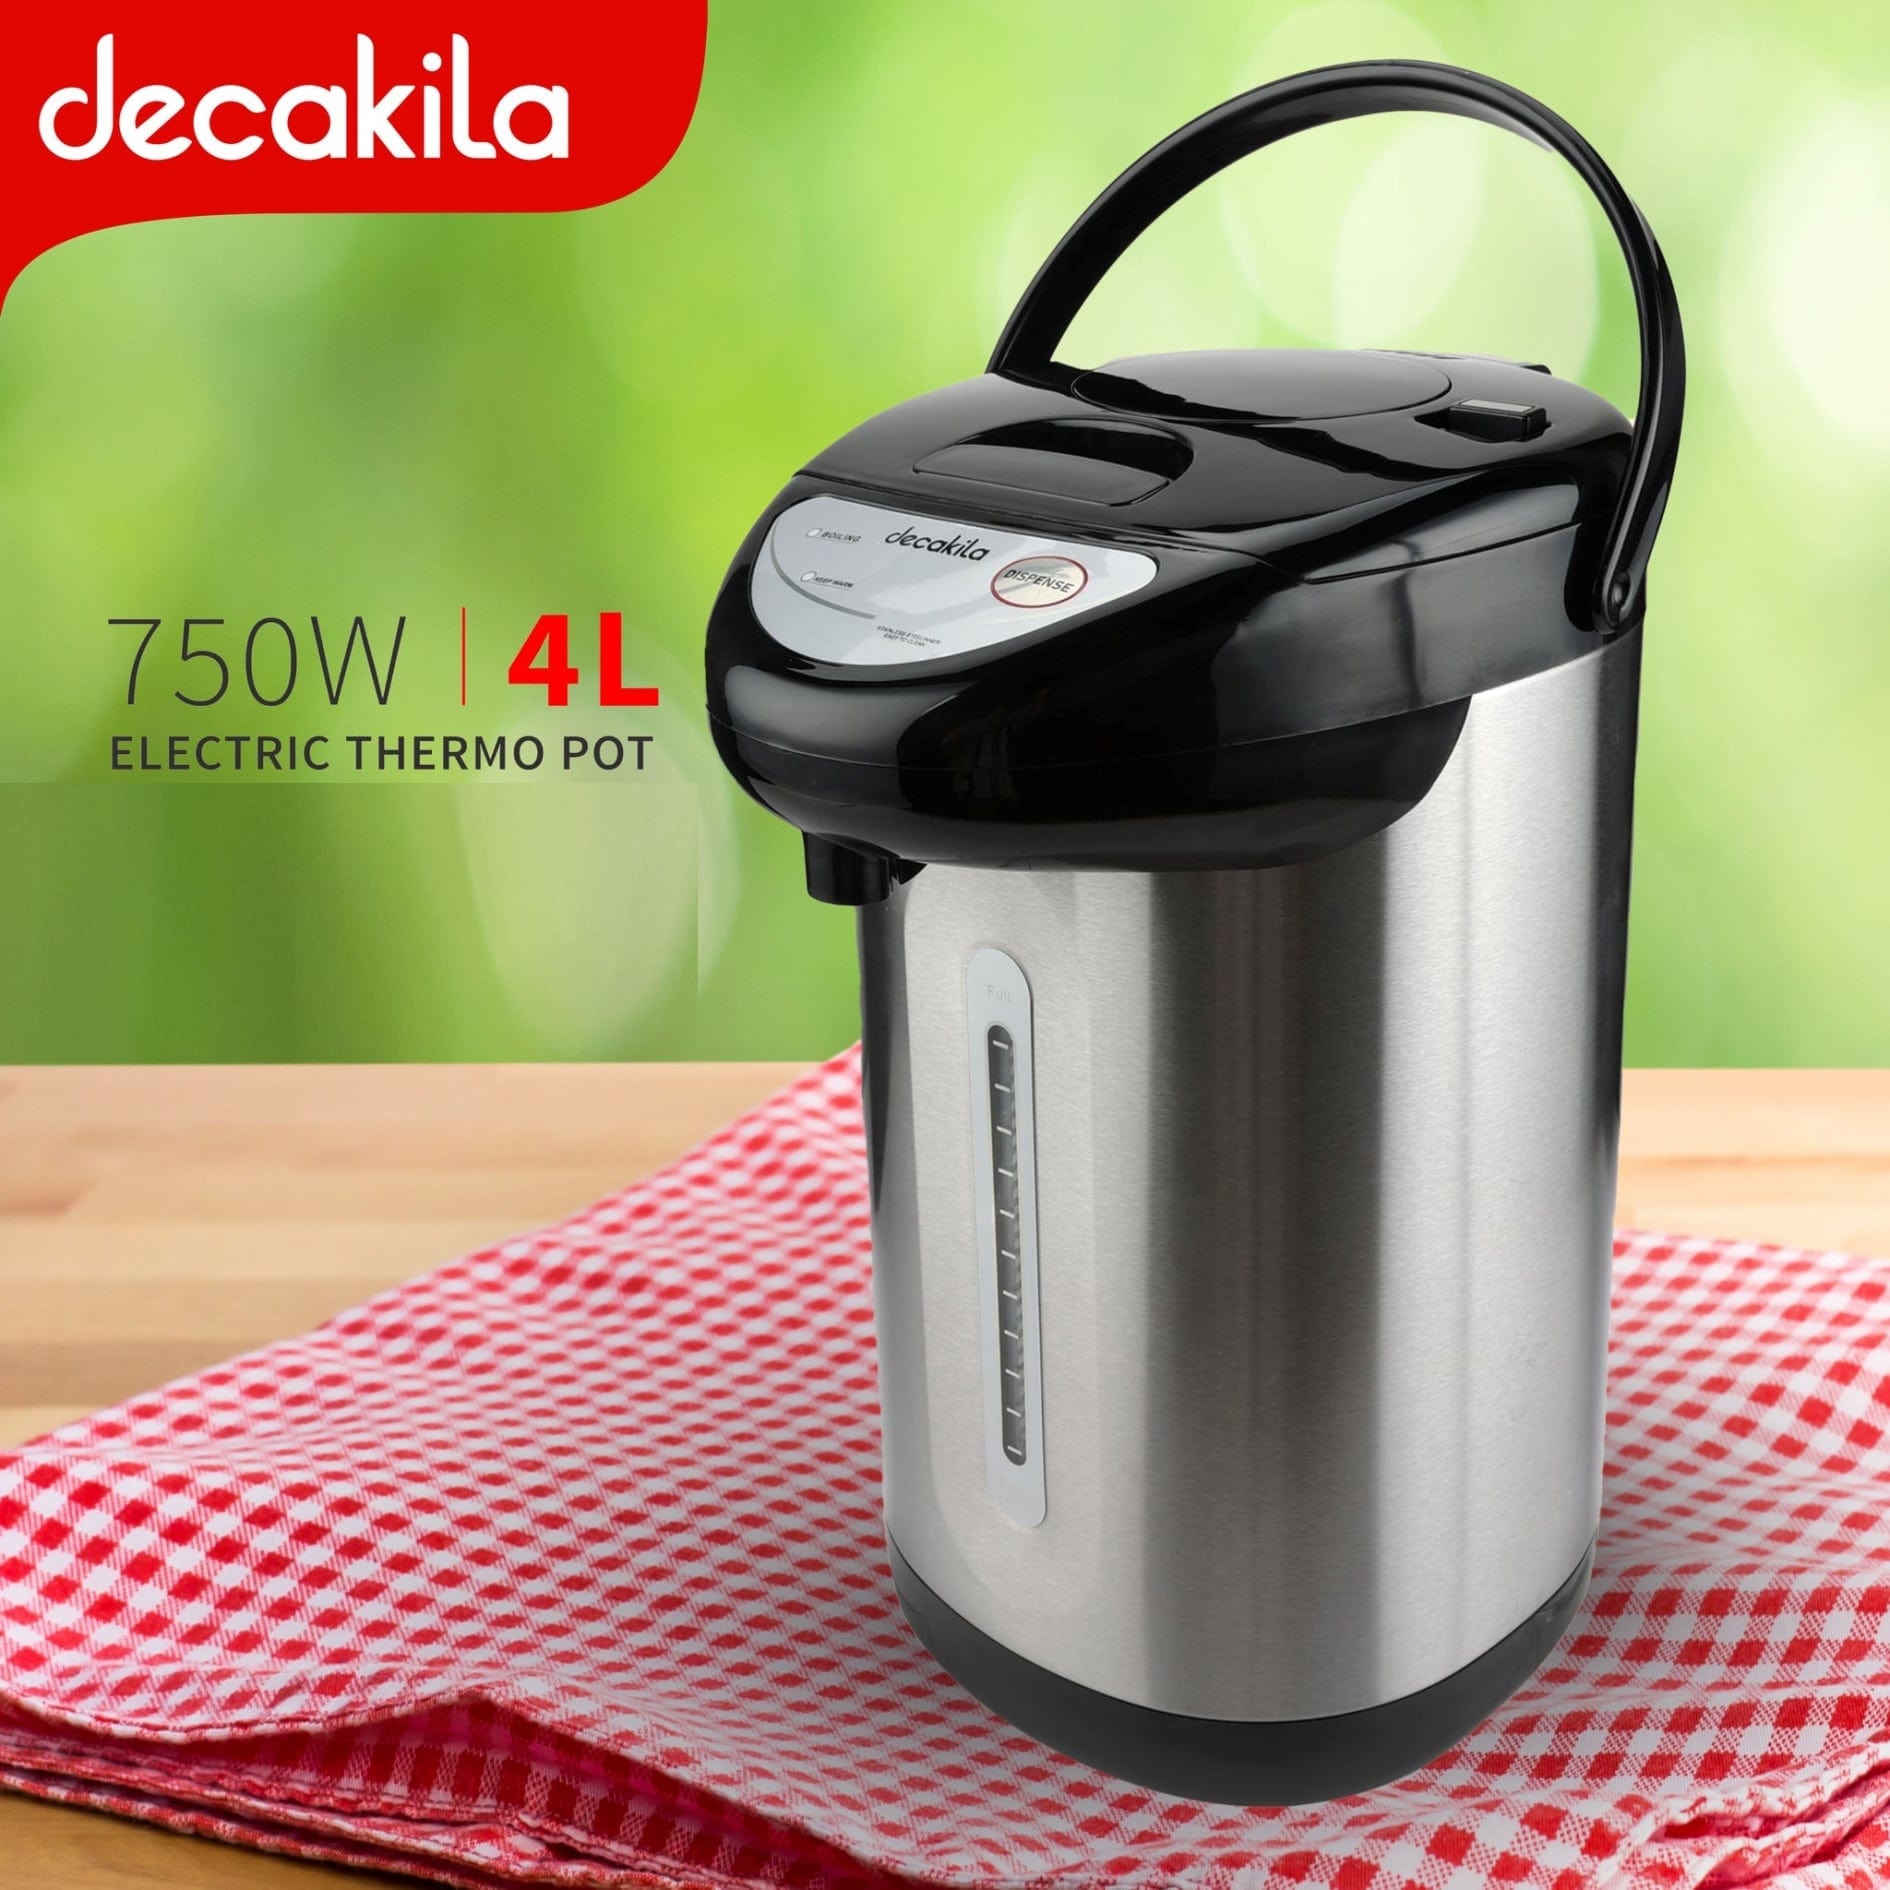 Buy Decakila 4L Electric Thermo Pot 750W - KEKT029B in Ghana | Supply Master Electric Kettle Buy Tools hardware Building materials